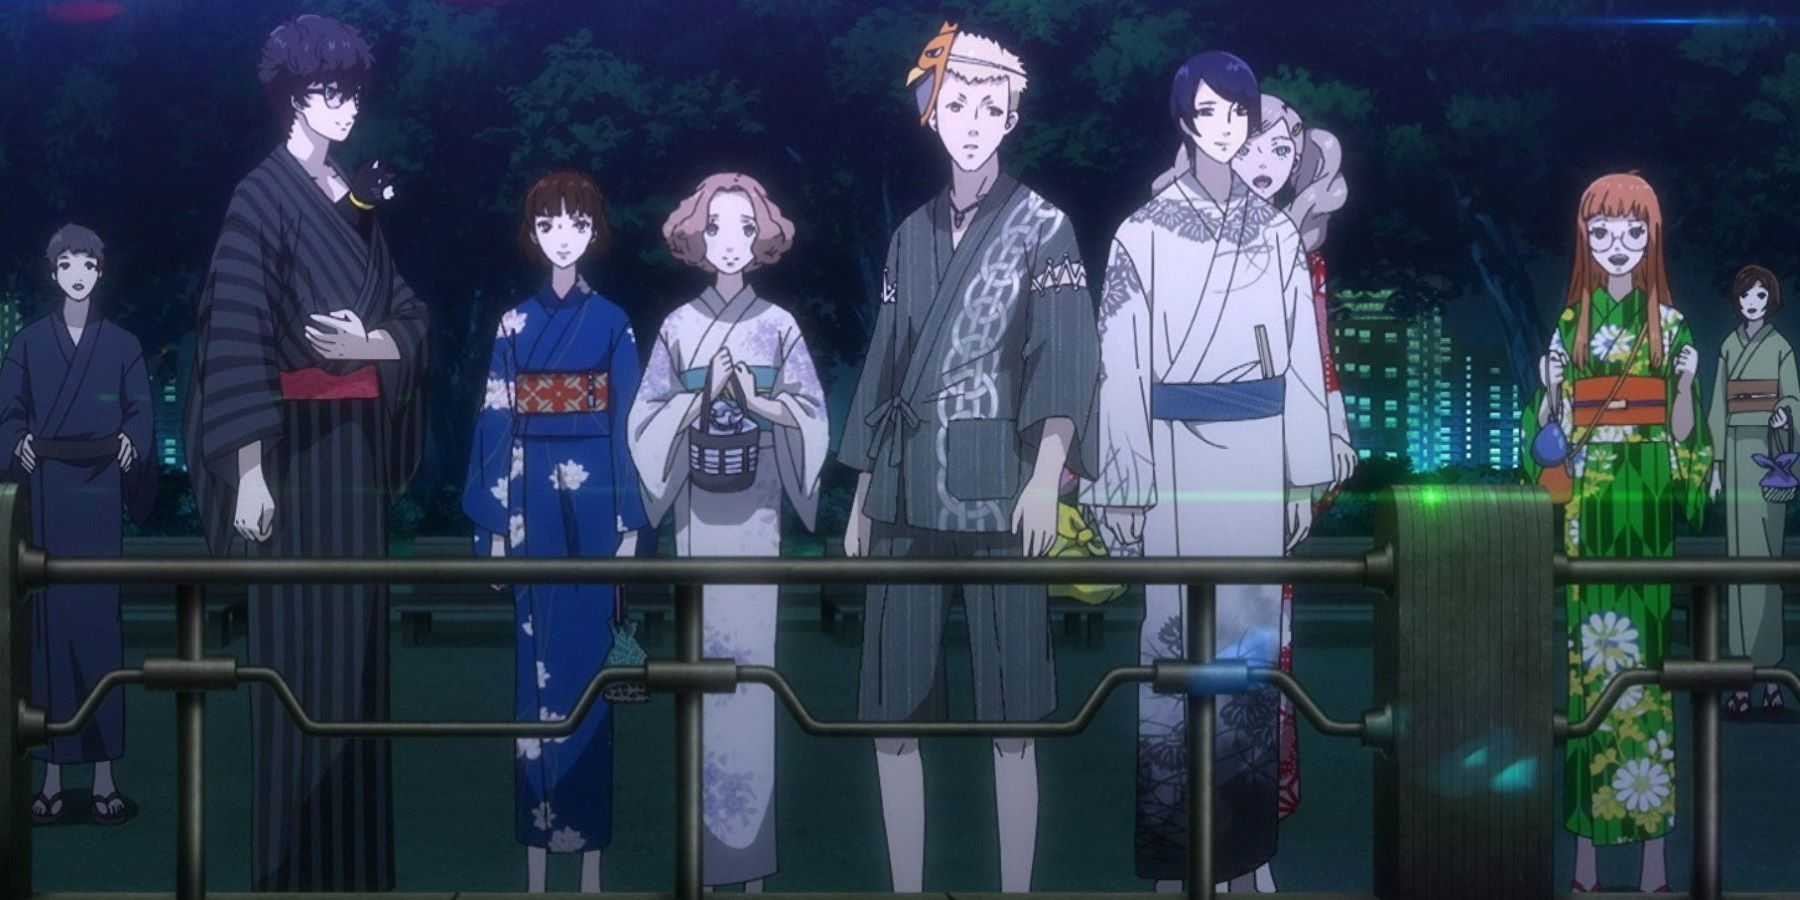 The Phantom Thieves standing by a railing and wearing yukatas during a cutscene from Persona 5 Strikers